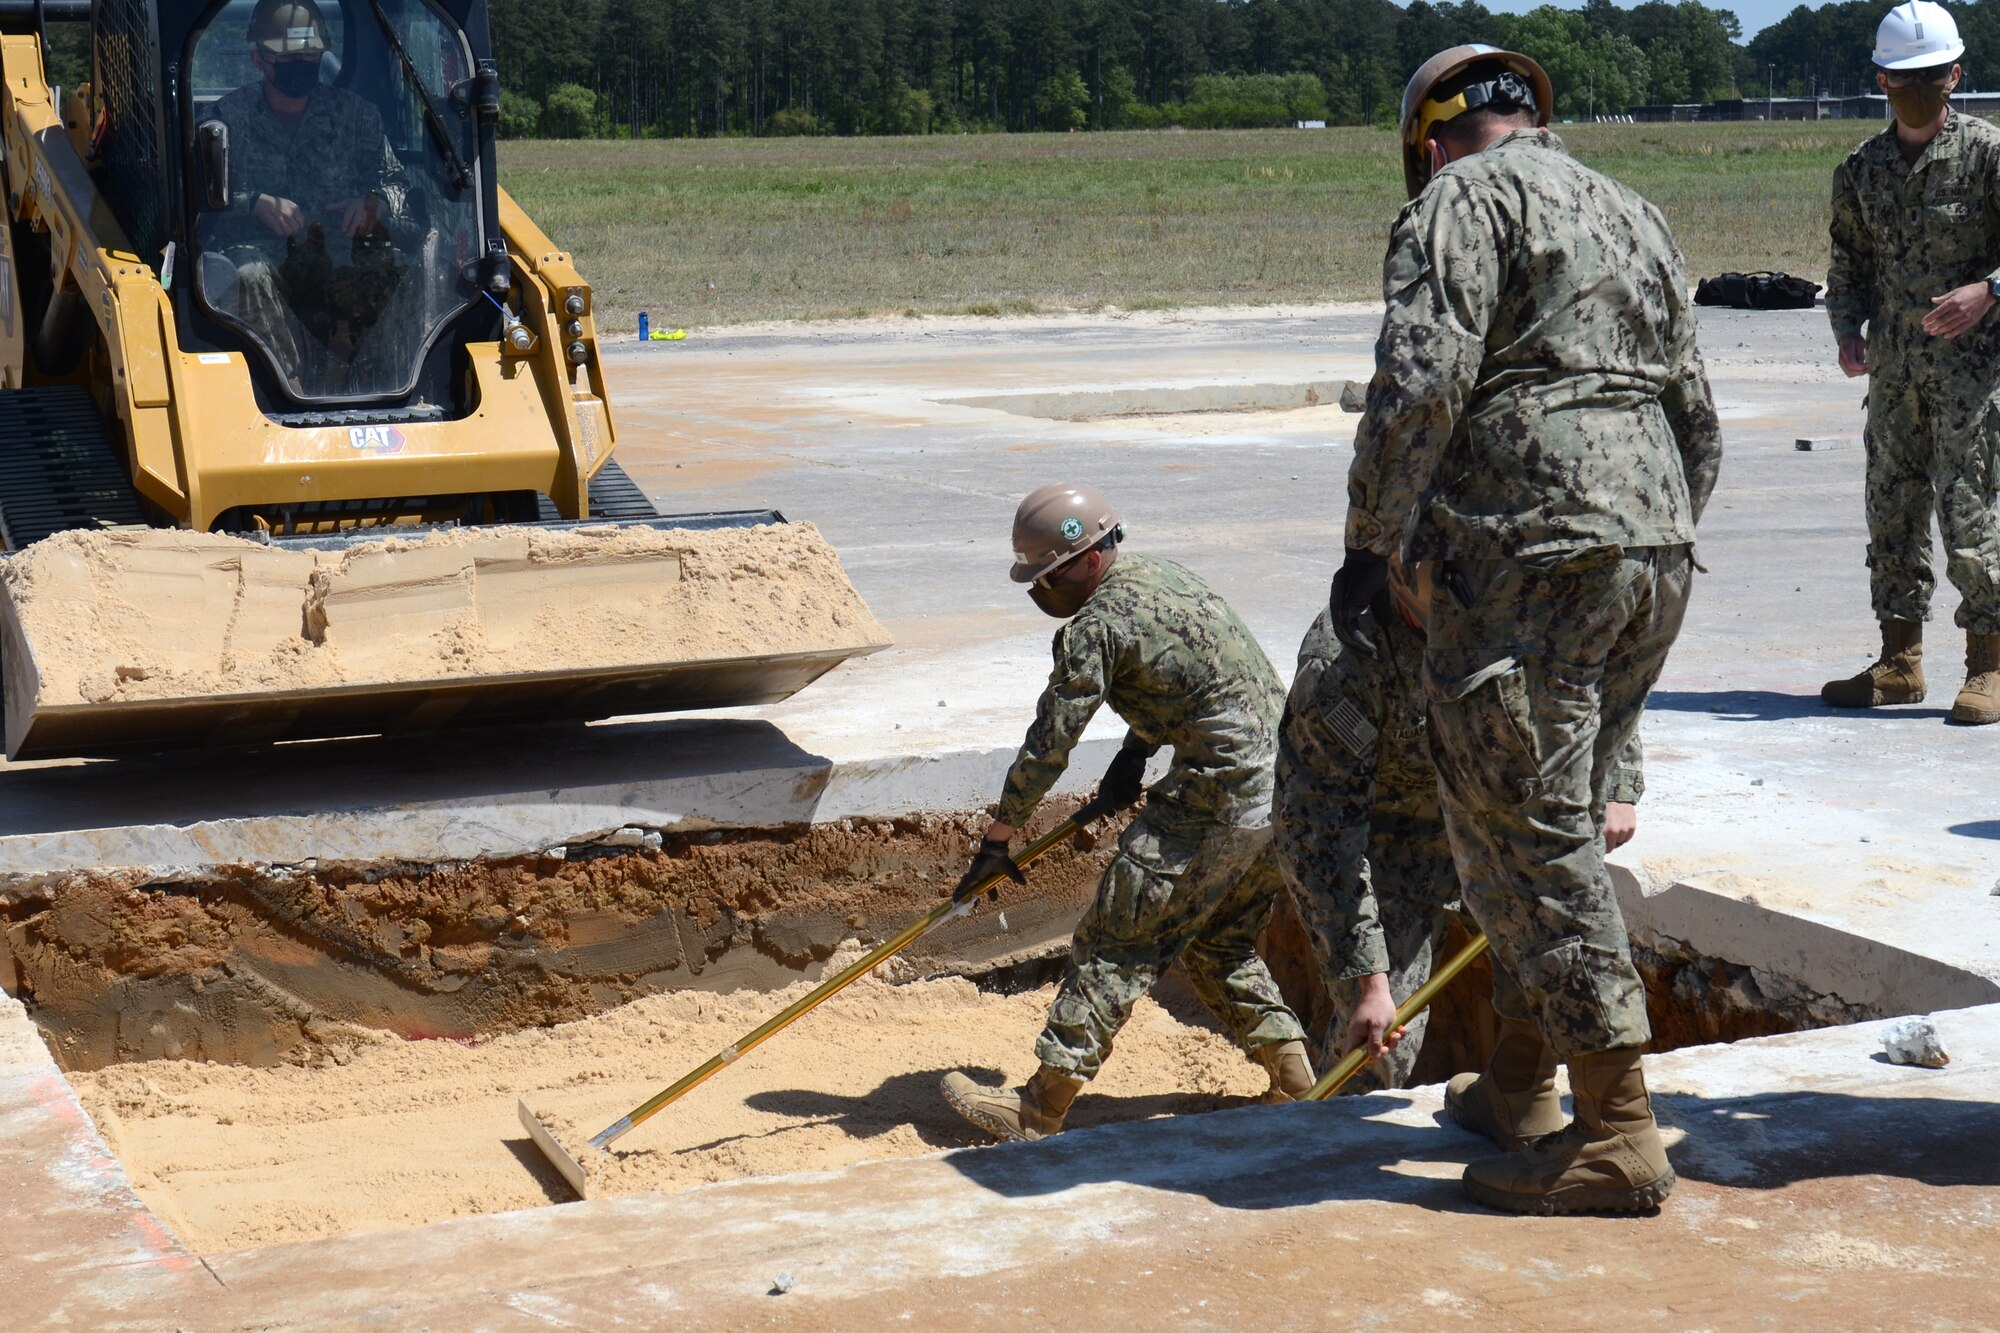 U.S. Navy engineers from Navy Mobile Construction Battalion 133, Gulfport, Mississippi, fill in an excavated hole during an Expedient and Expeditionary Airfield Damage Repair (E-ADR) Joint Capability Technology Demonstration at McEntire Joint National Guard Base, South Carolina, April 22, 2021. The demonstration field tests the “just enough, just-in-time” repair capability on a decommissioned runway at McEntire Joint National Guard Base. The Department of Defense’s E-ADR concept uses local materials and minimal personnel and equipment in order to expedite a temporary runway repair. (U.S. Air National Guard photo by Lt. Col. Jim St.Clair, 169th Fighter Wing Public Affairs)